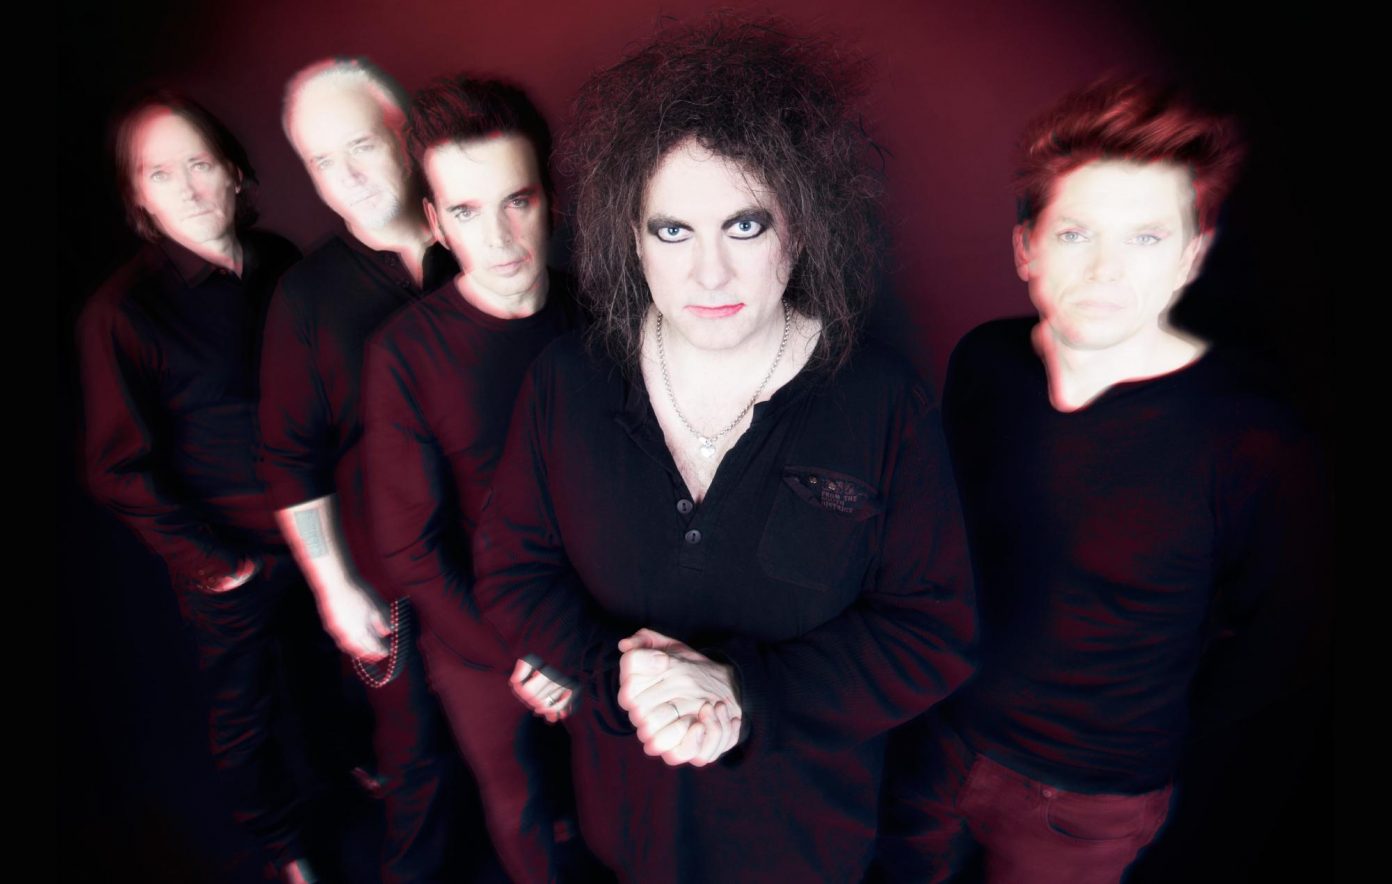 thecure 2000x1270 1 1392x884 1